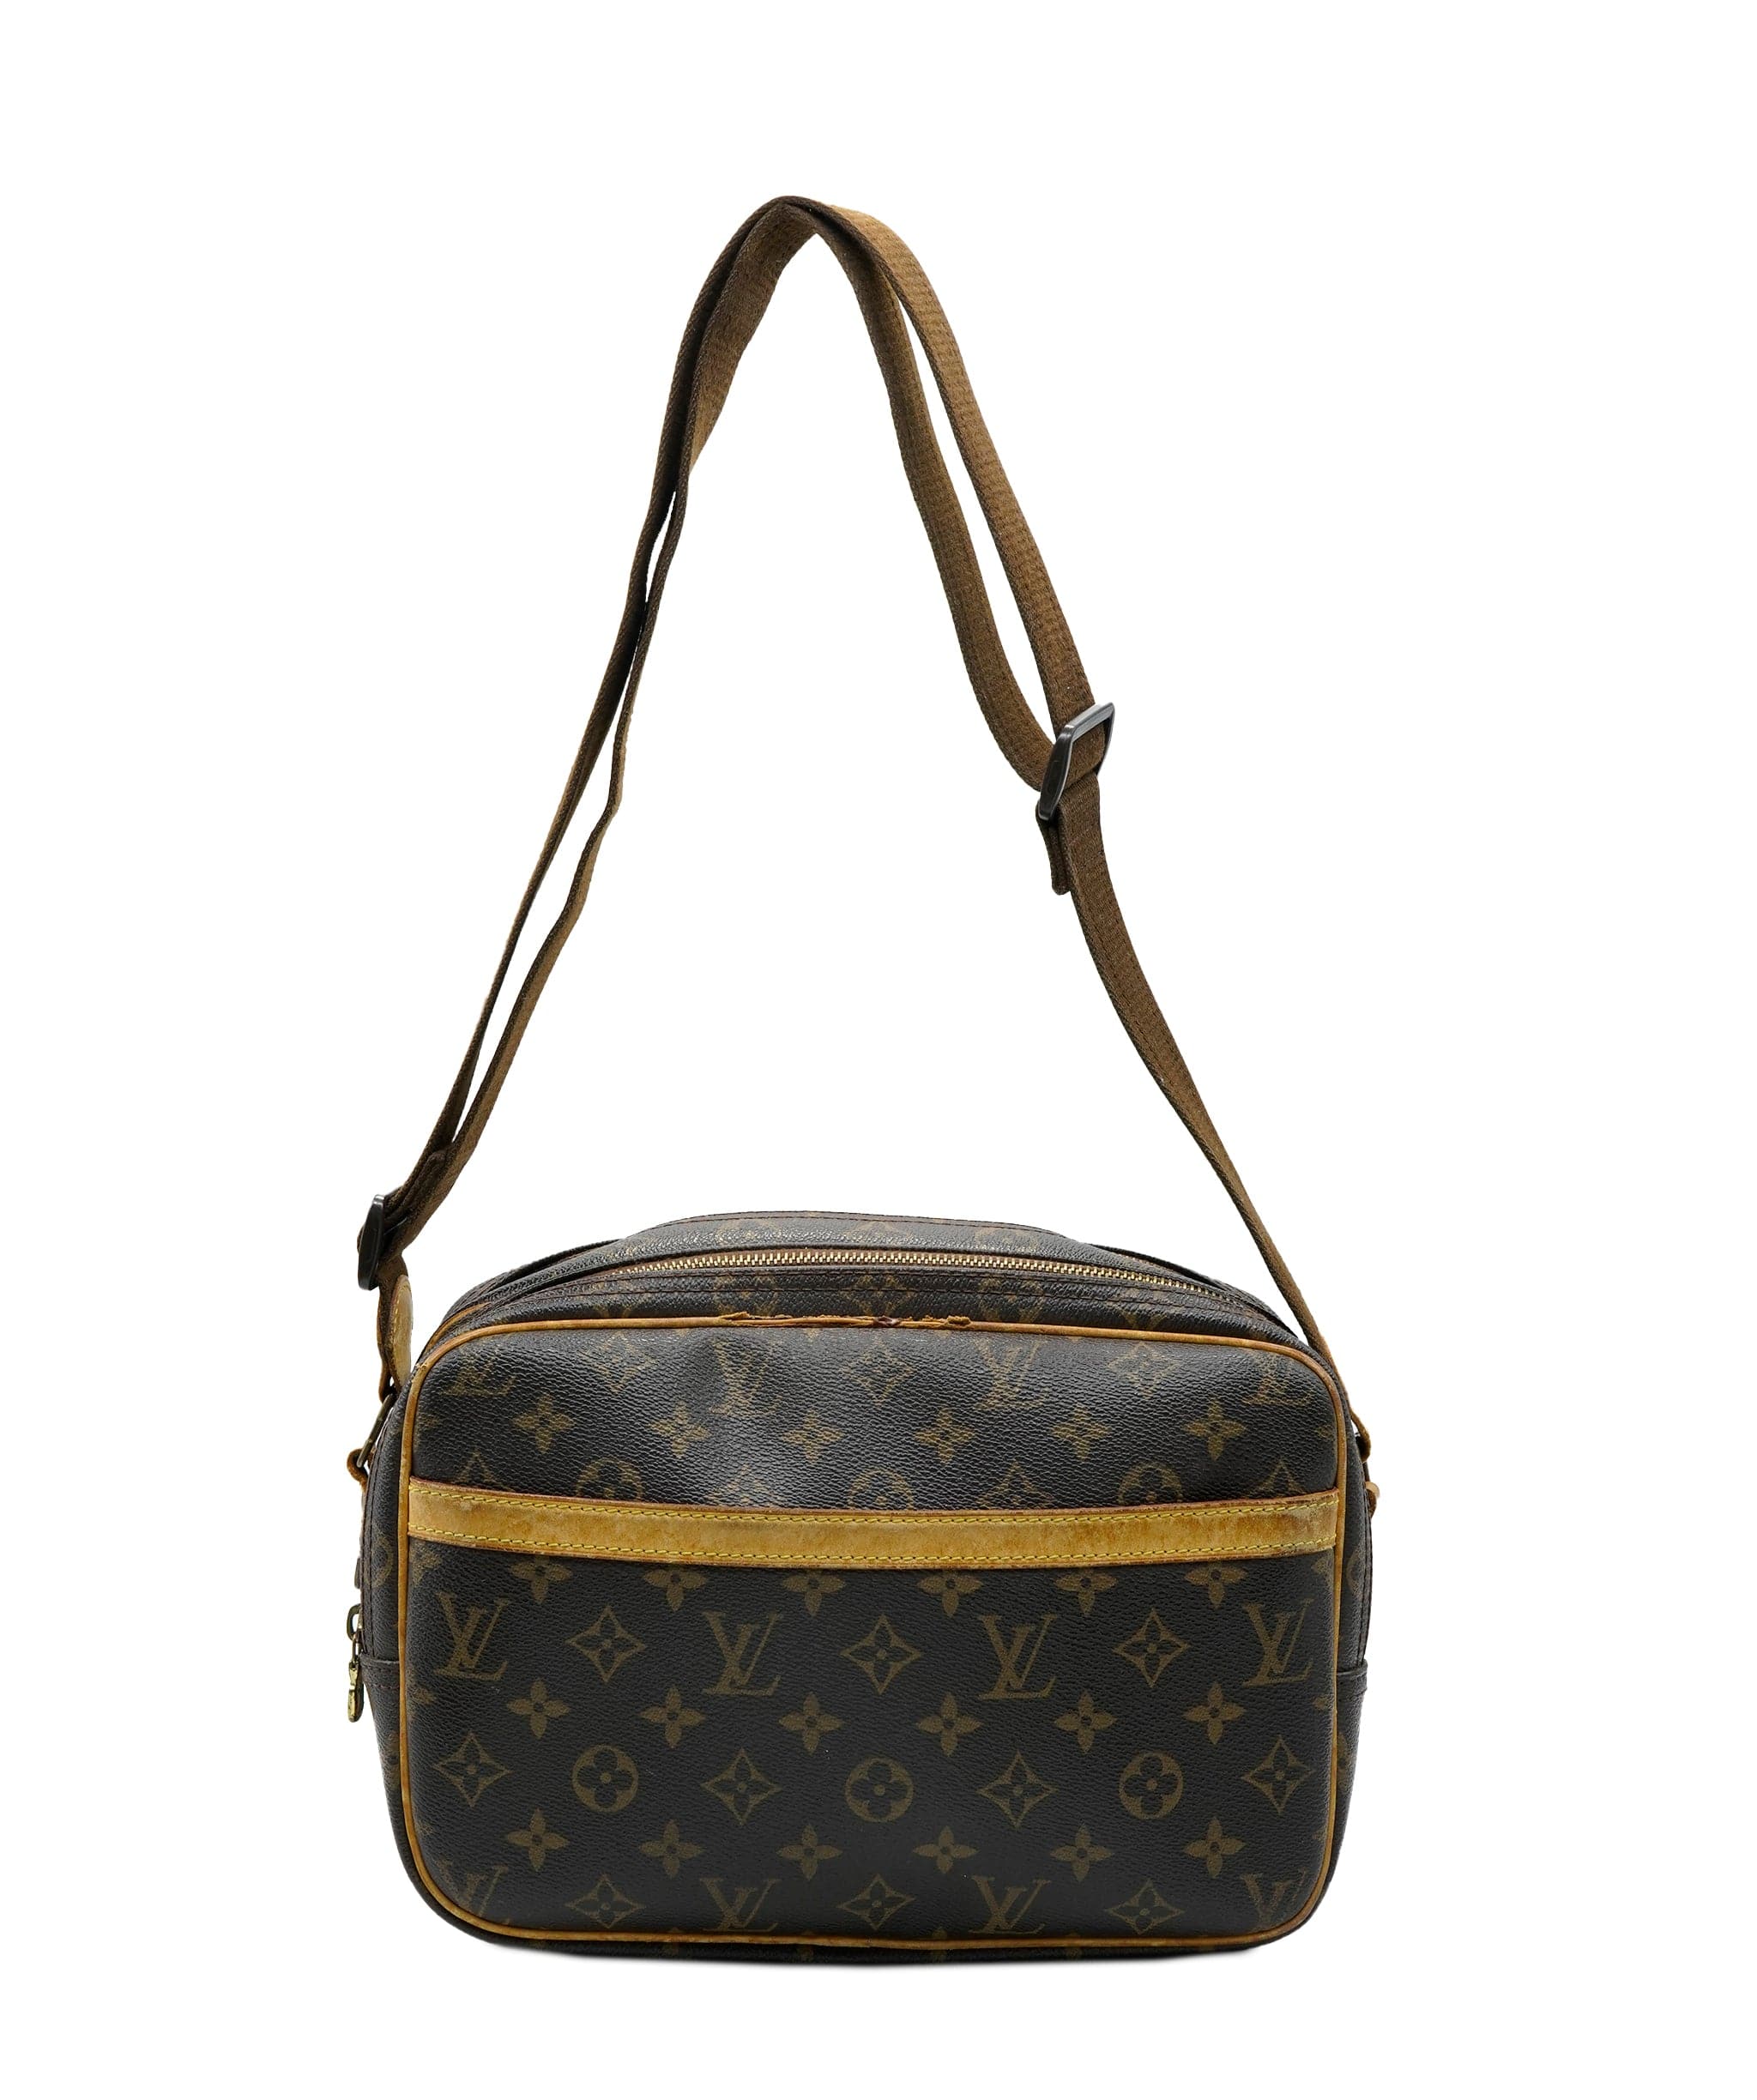 Buy PRE OWNED LOUIS VUITTON AND ACCESSORIES Online